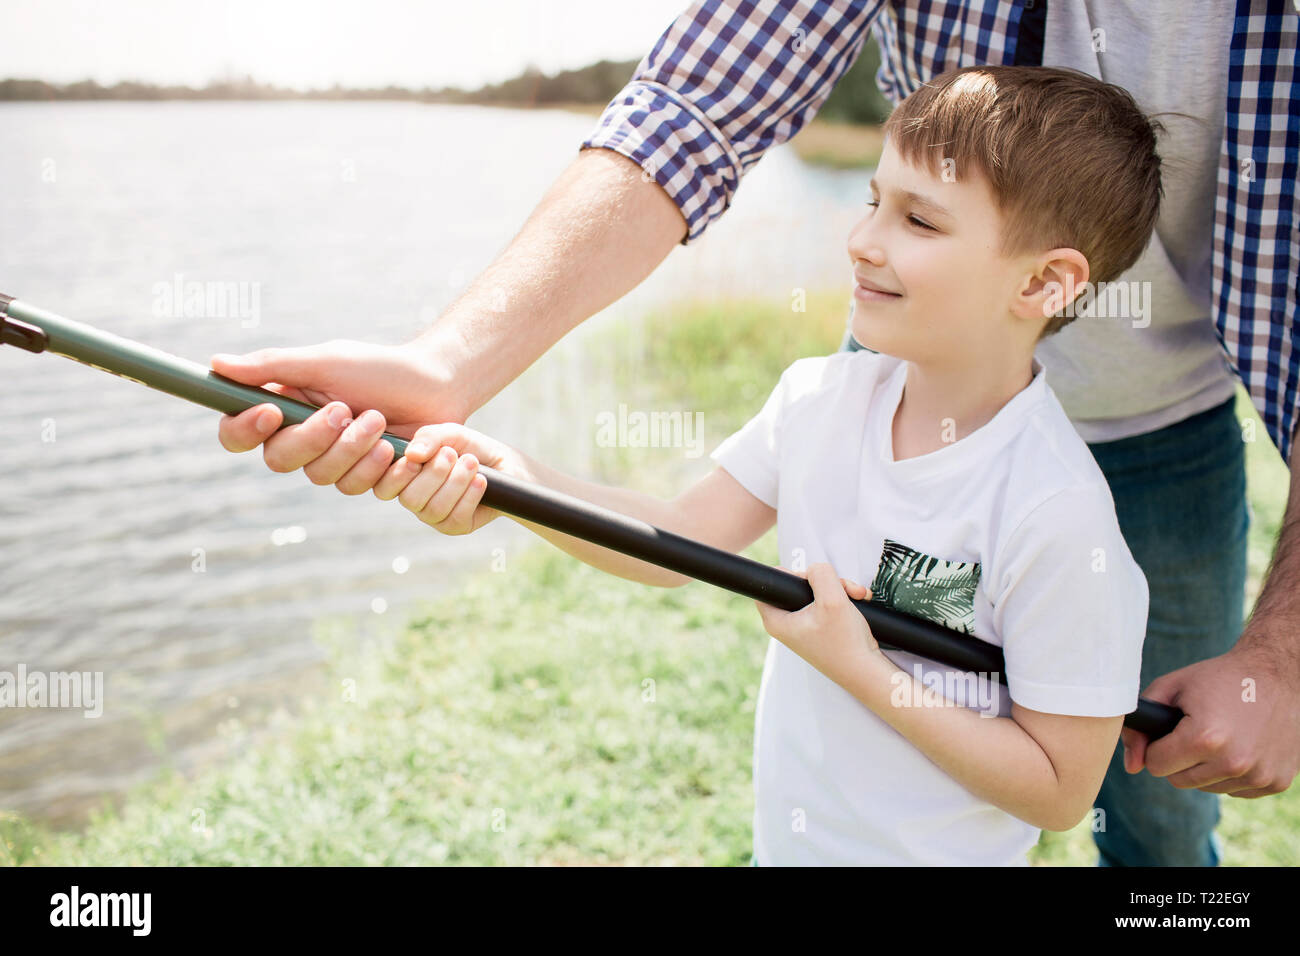 https://c8.alamy.com/comp/T22EGY/a-picture-of-guy-helping-his-son-to-hold-fish-rod-in-a-right-way-he-is-holding-it-with-one-hand-while-boy-is-doing-that-with-two-hands-small-man-see-T22EGY.jpg